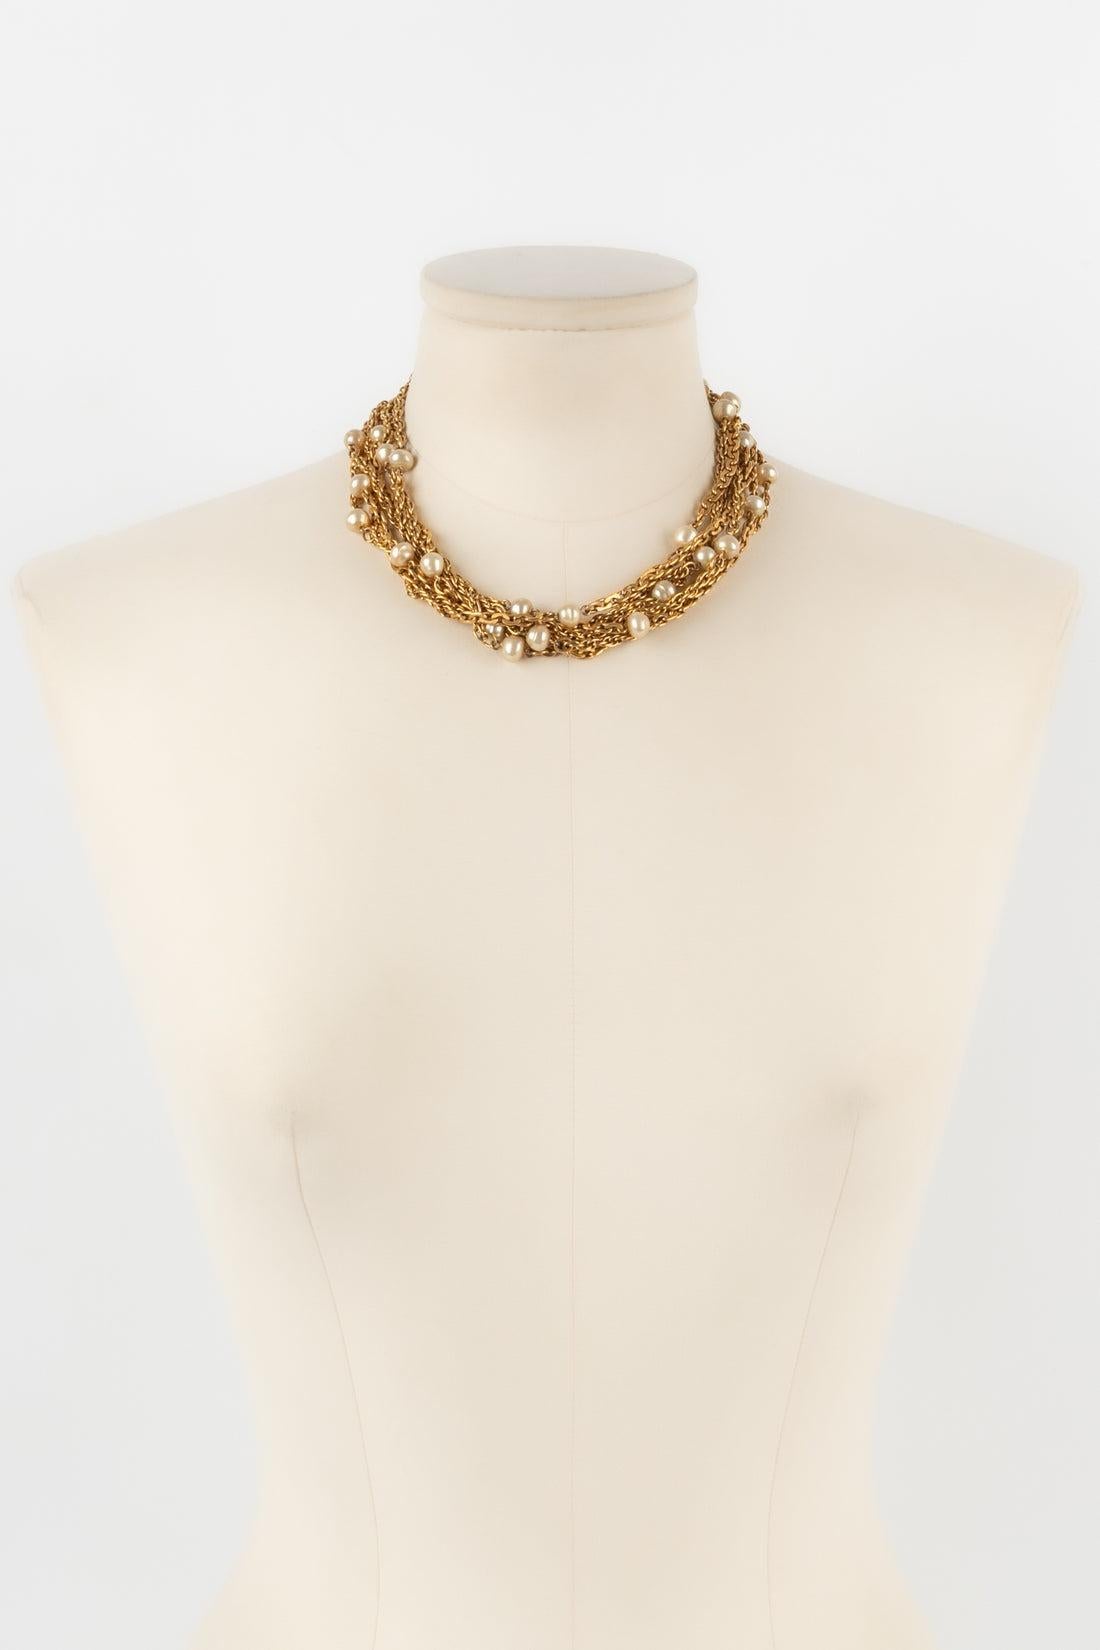 Chanel - Multi-row golden metal chain choker with costume pearls.

Additional information:
Condition: Very good condition
Dimensions: Length: 41 cm

Seller Reference: CB153